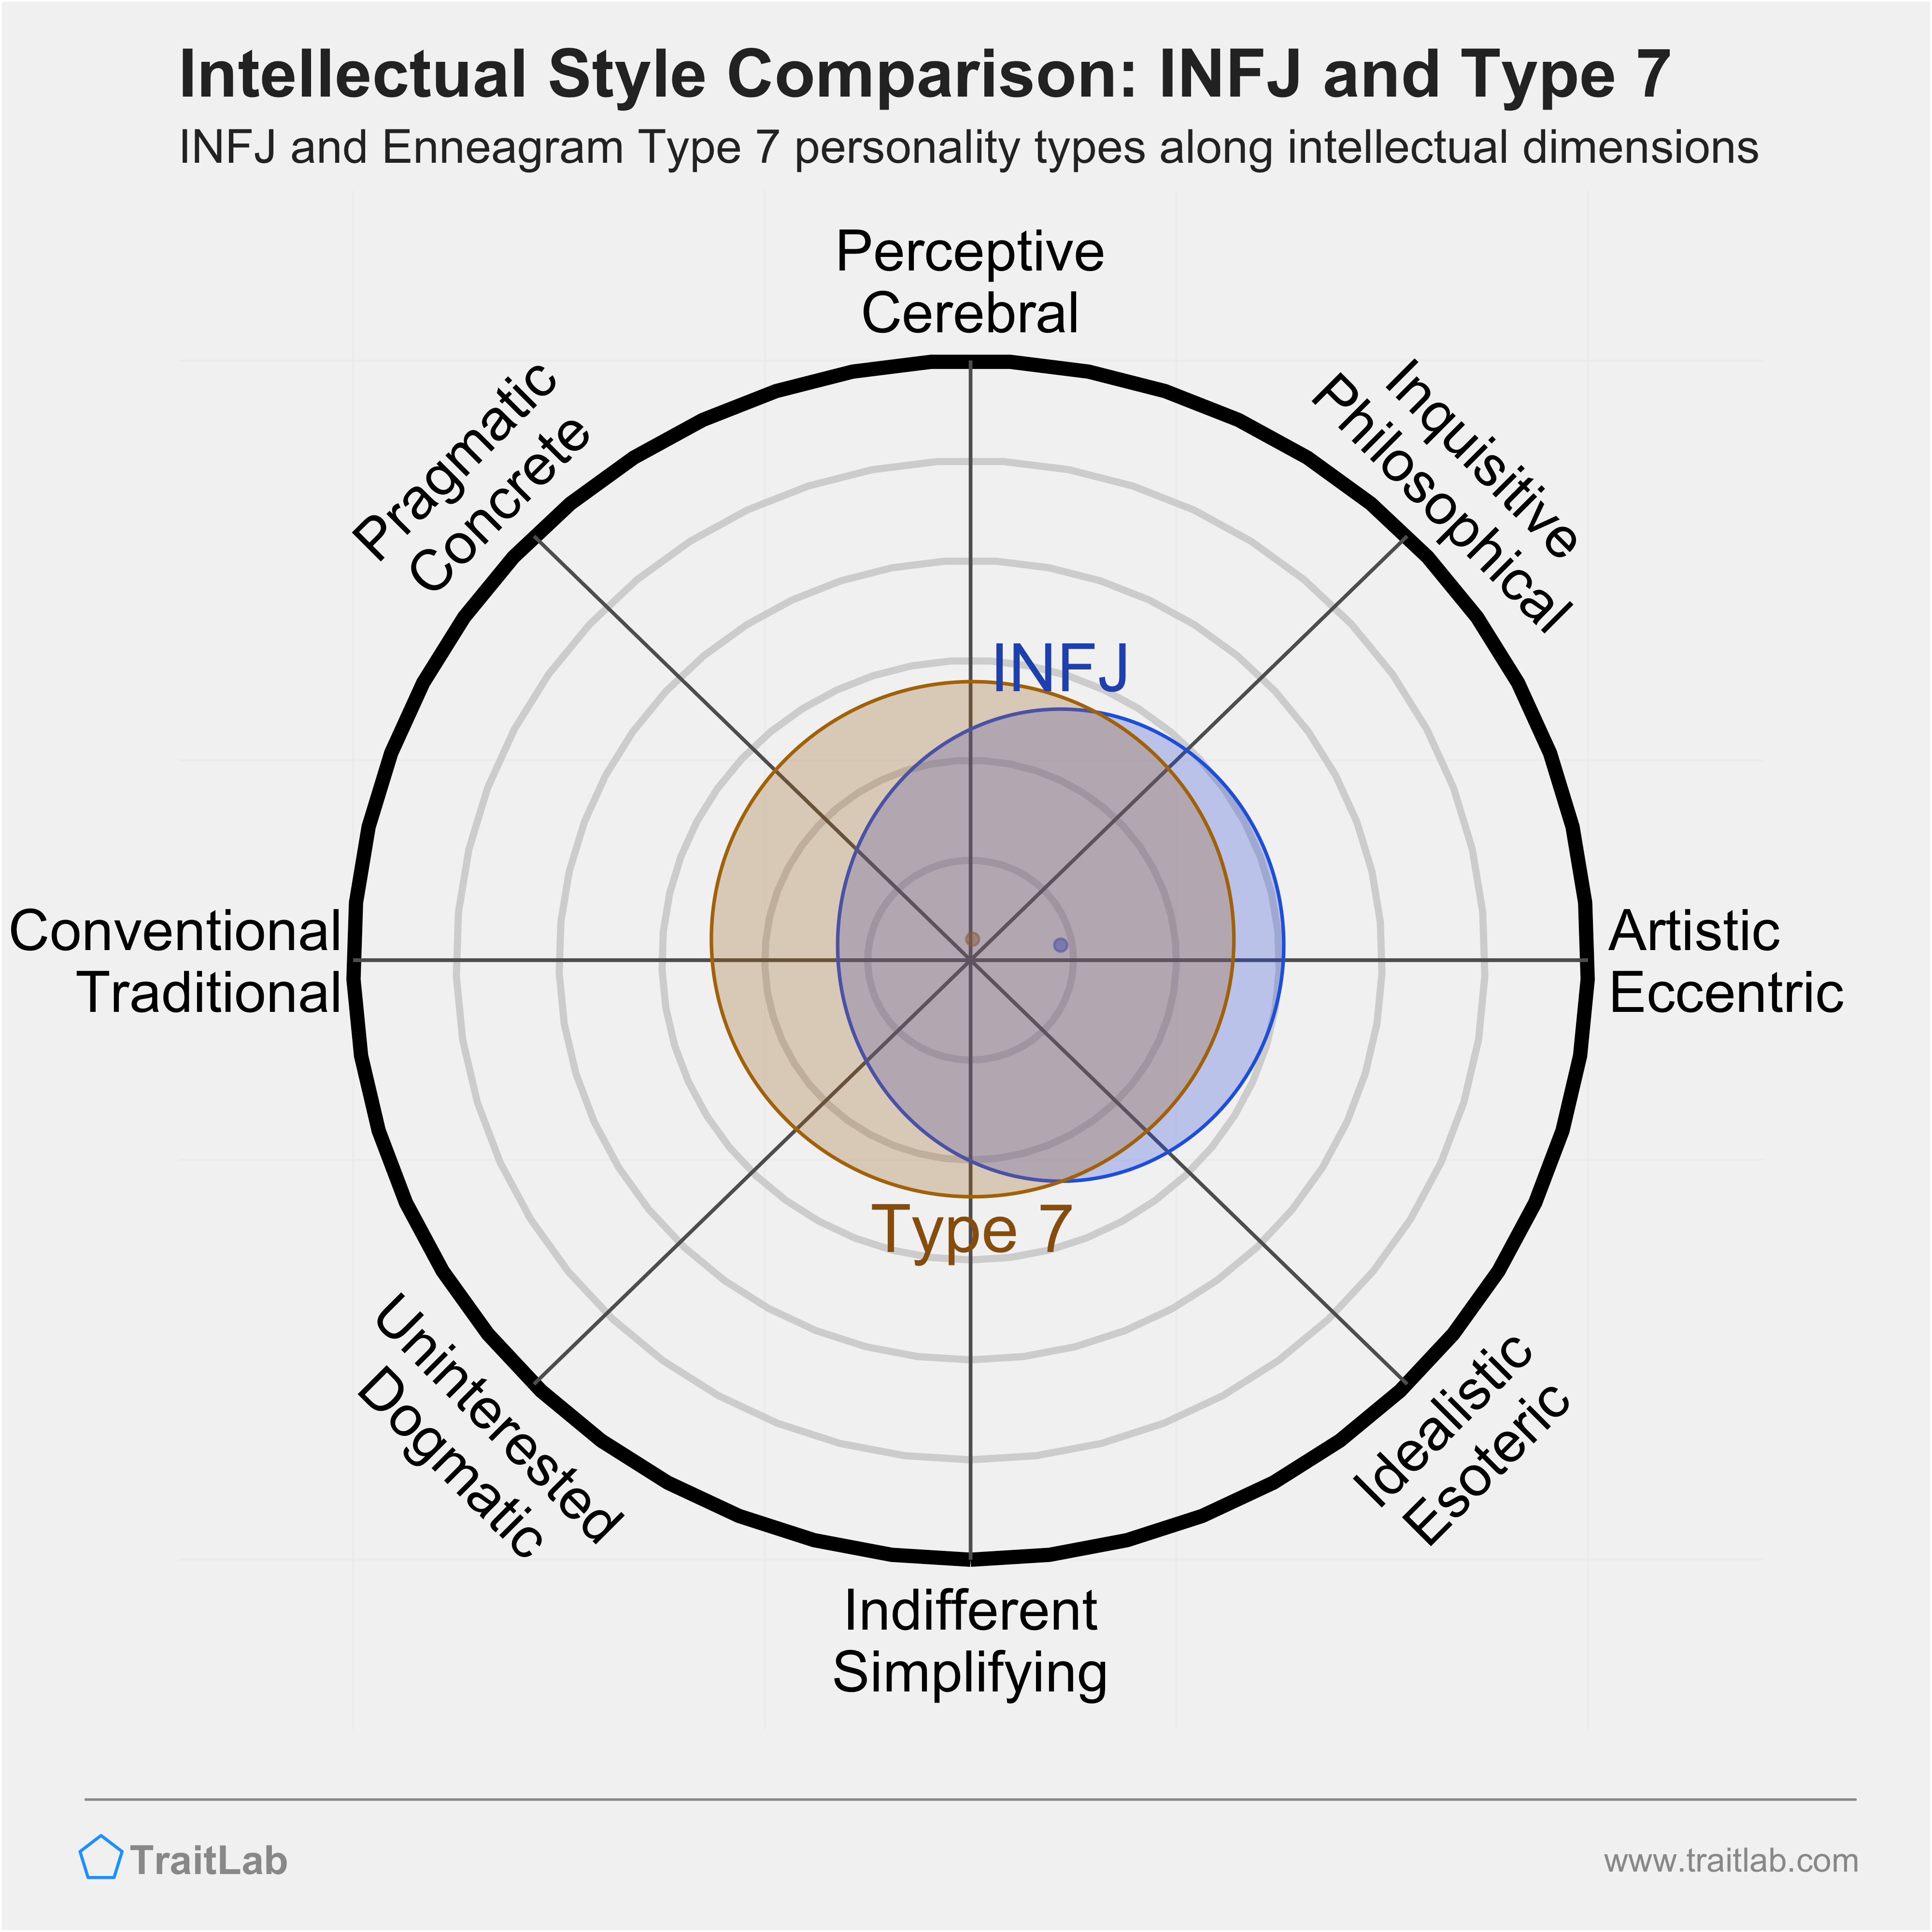 INFJ and Type 7 comparison across intellectual dimensions